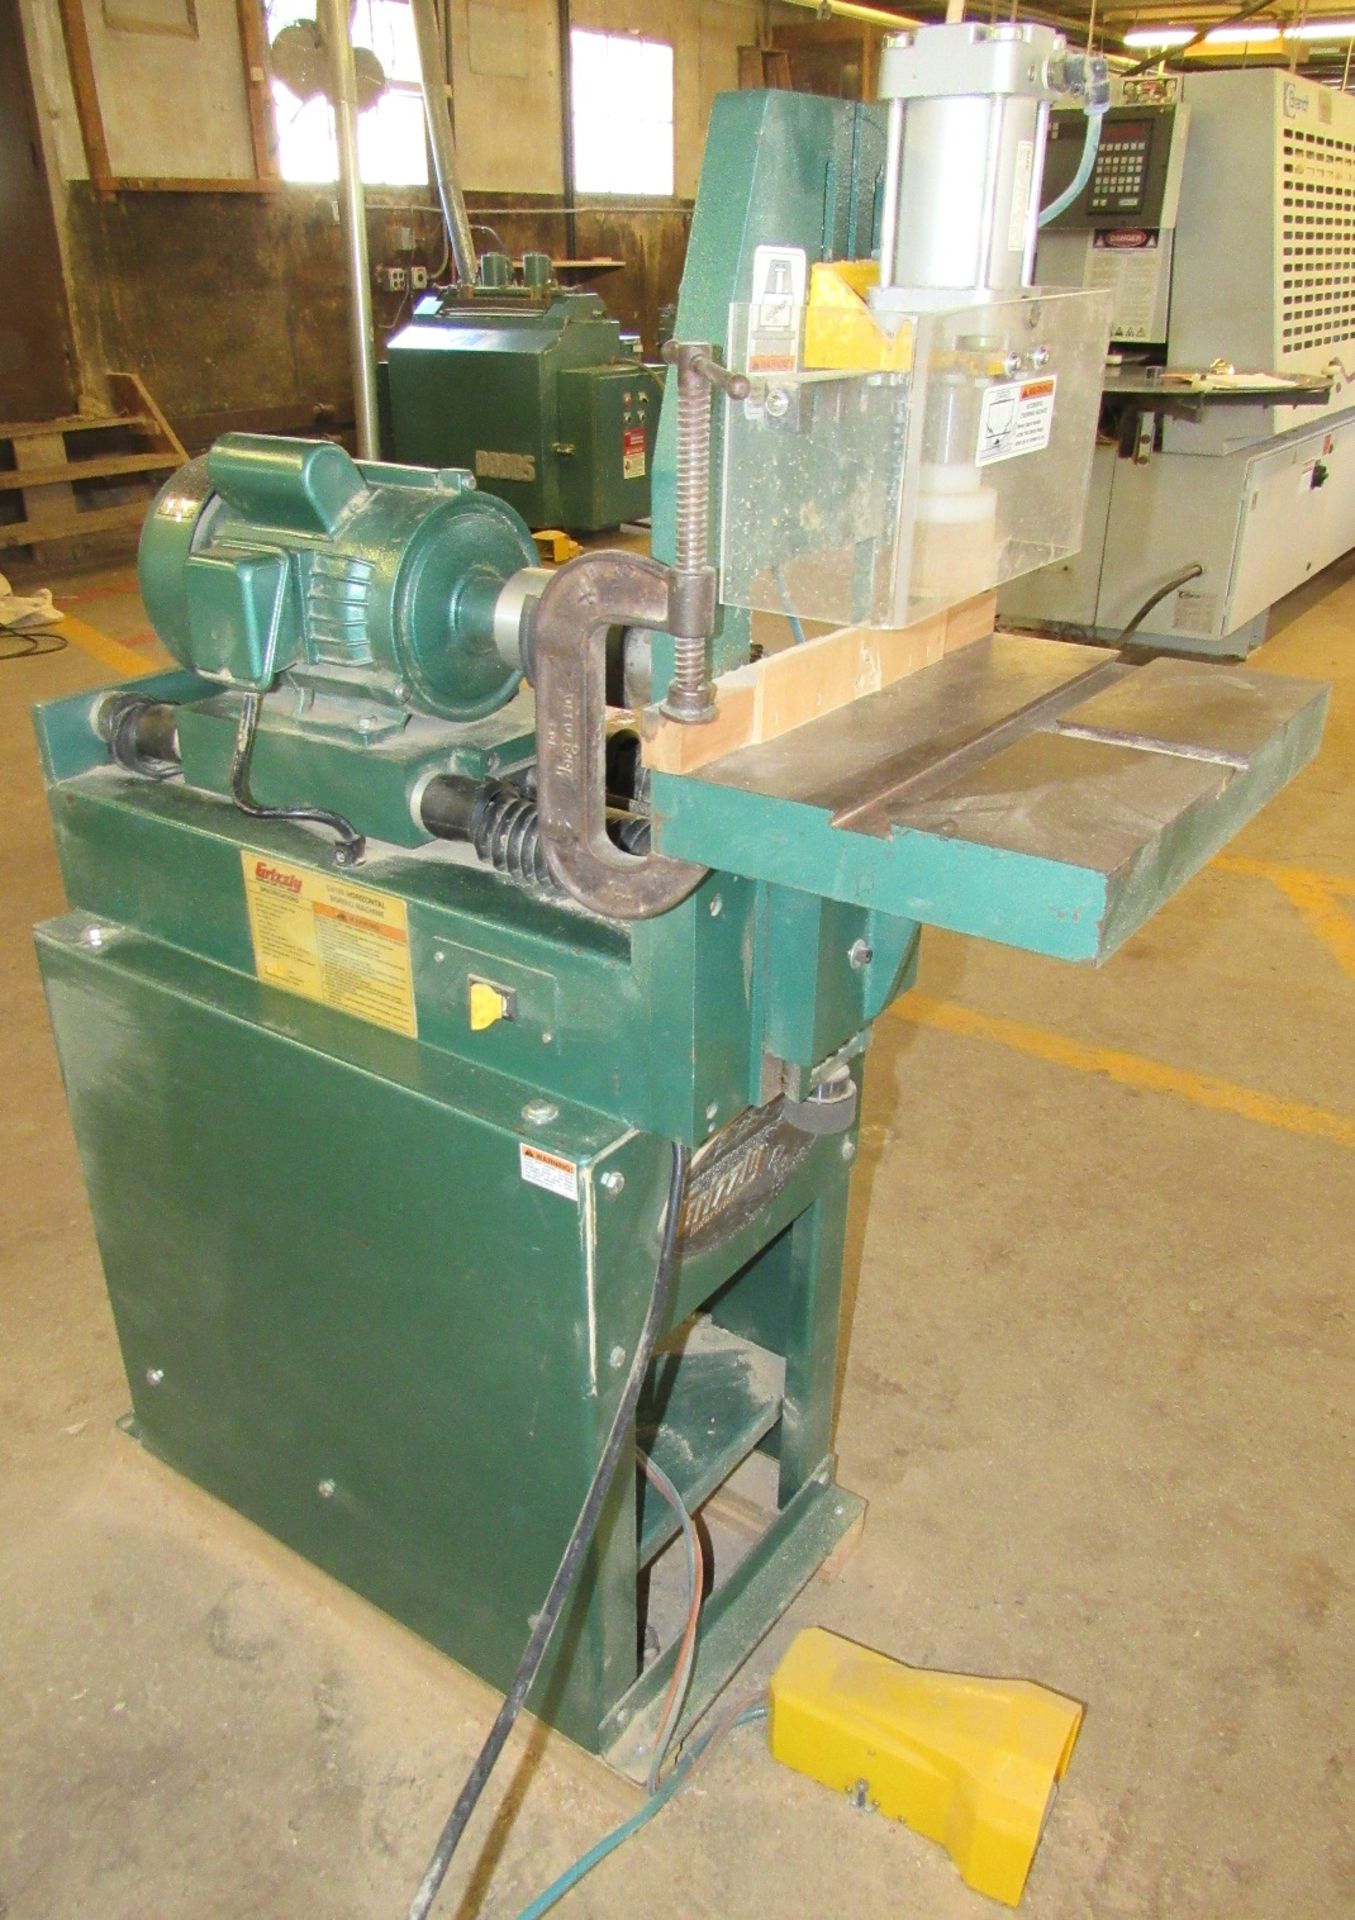 Grizzly Mod.G4185 2HP Horizontal Boring Machine - S/N 03103 (New 2003) - Image 3 of 3